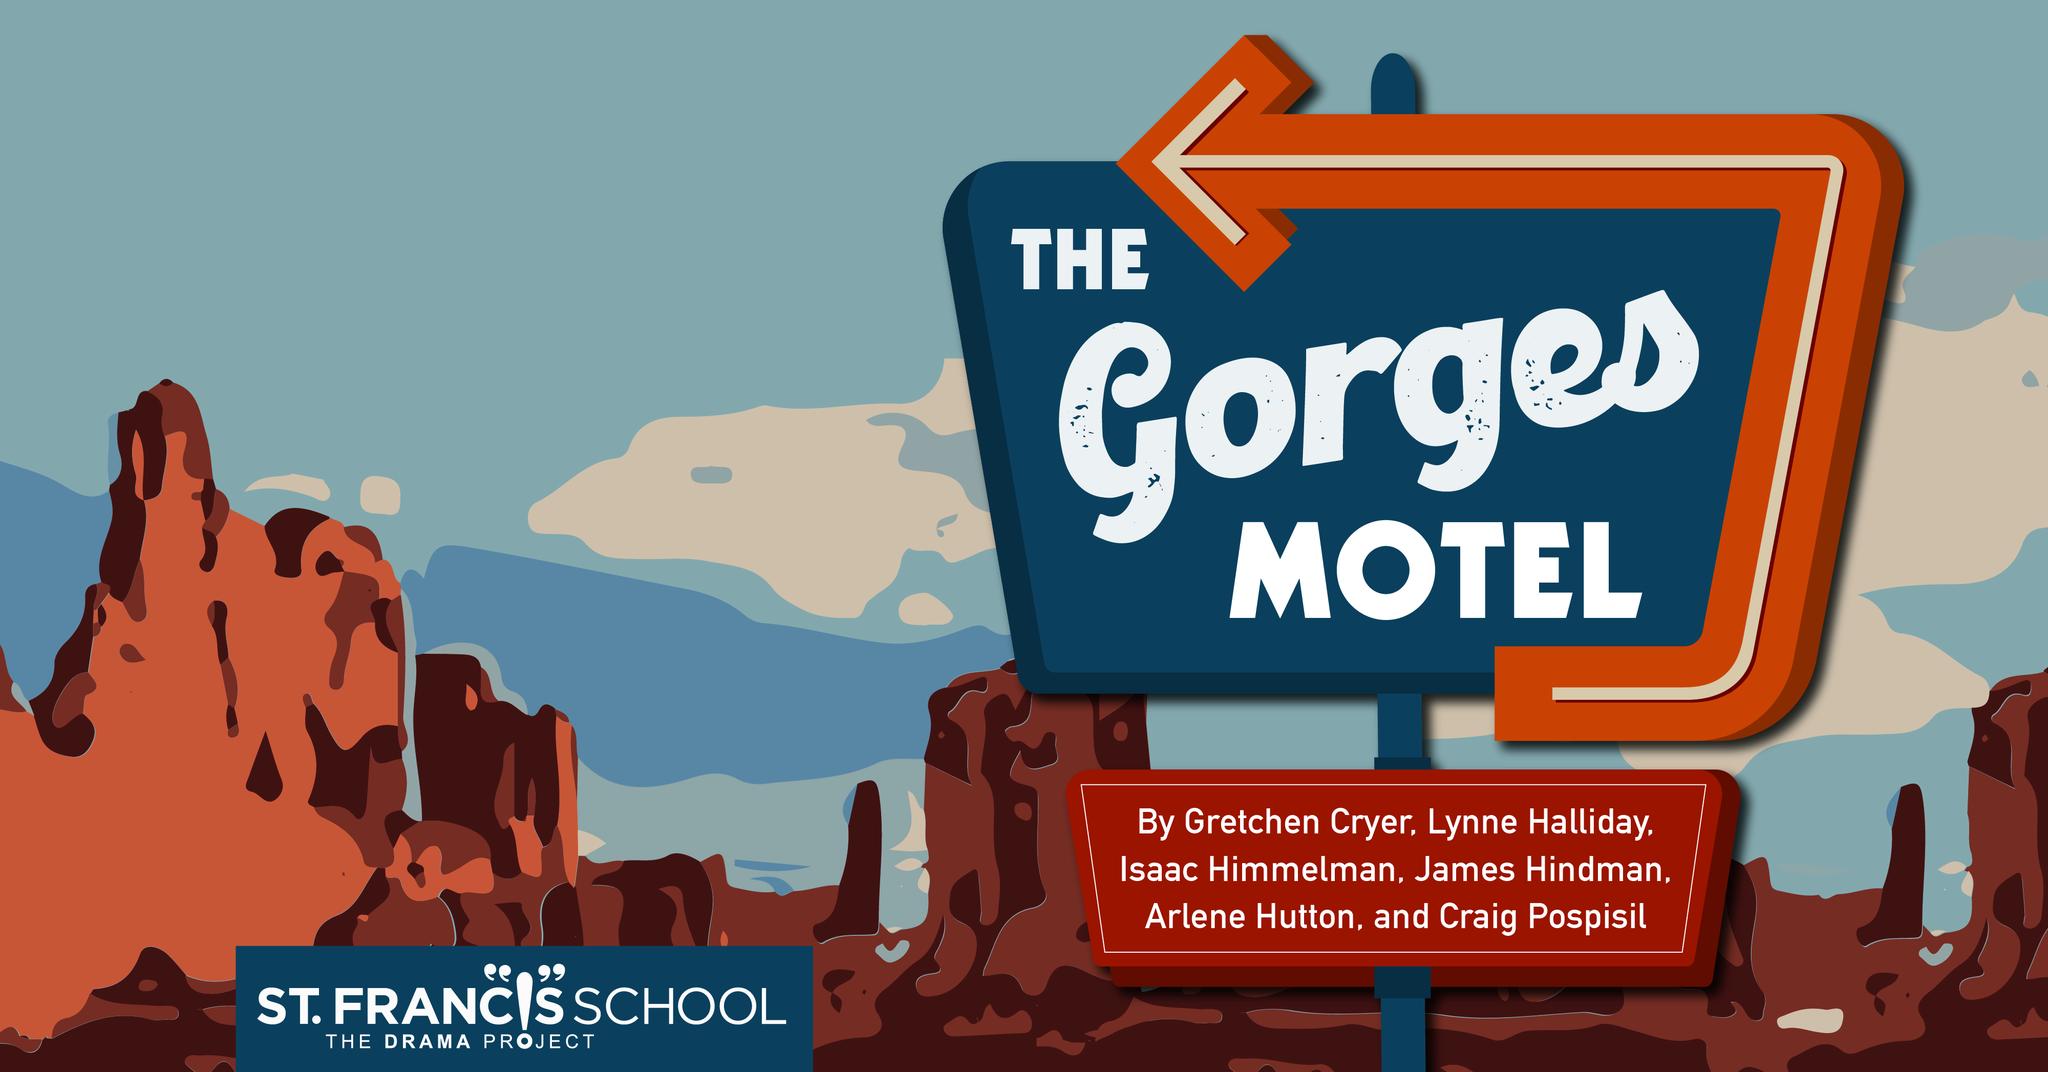 The Gorges Motel